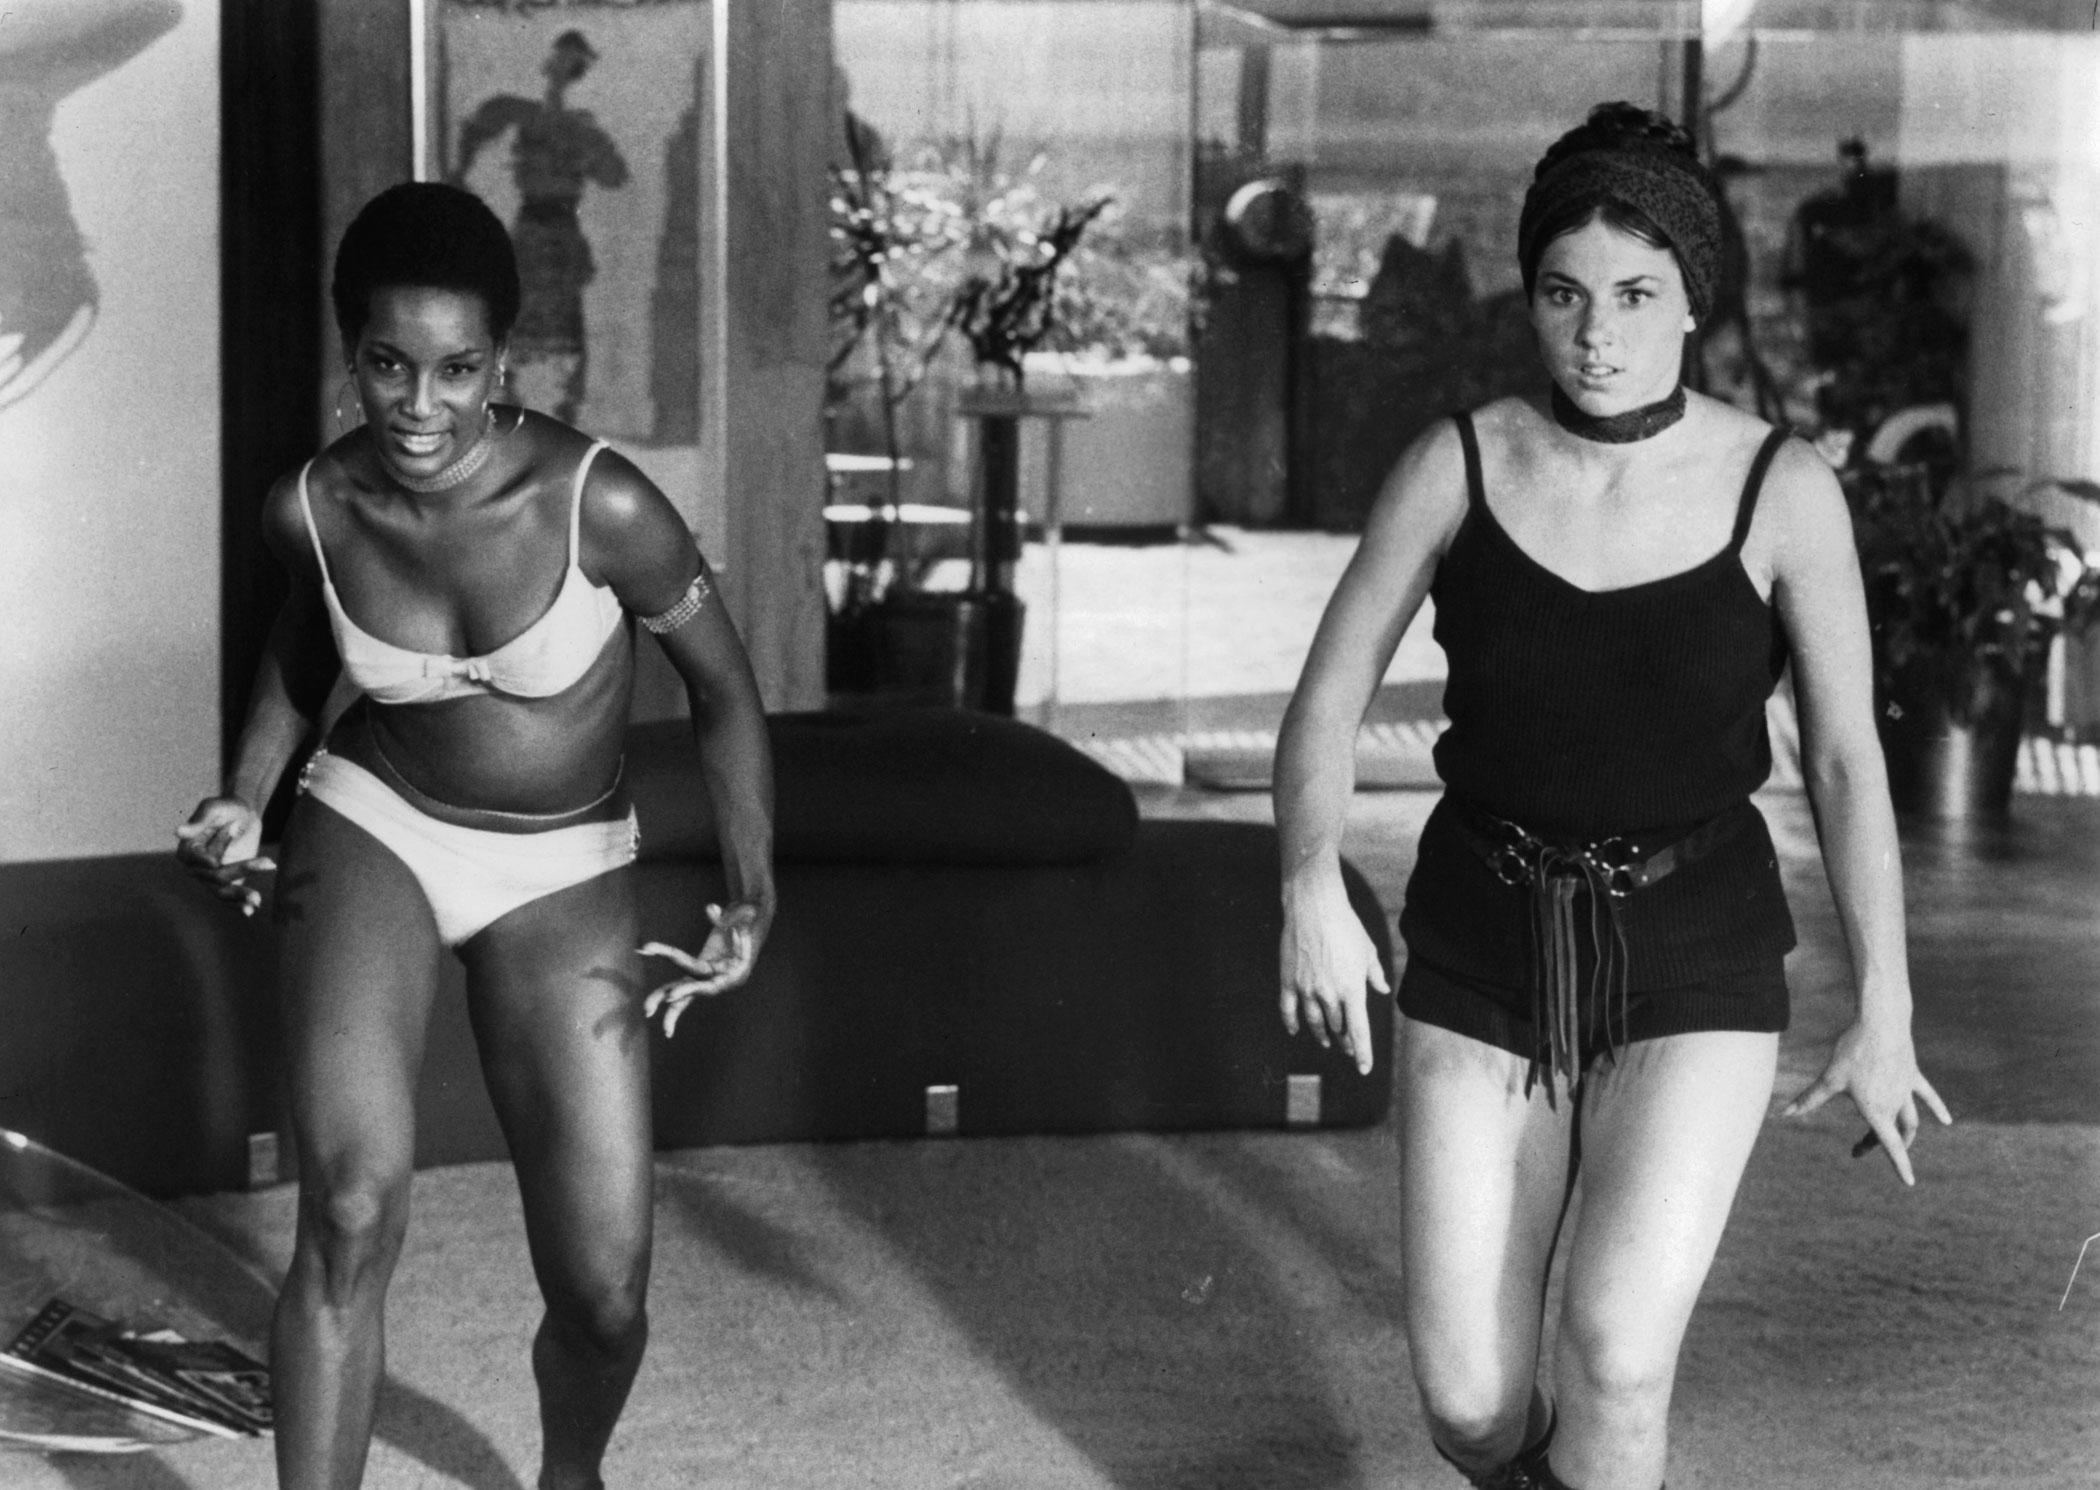 Bambi and Thumper (Lola Larson and Trina Parks, respectively)
                              Diamonds Are Forever, 1971
                              The gymnast body guards who kick James Bond’s butt aren’t major characters, but they certainly make an impression.